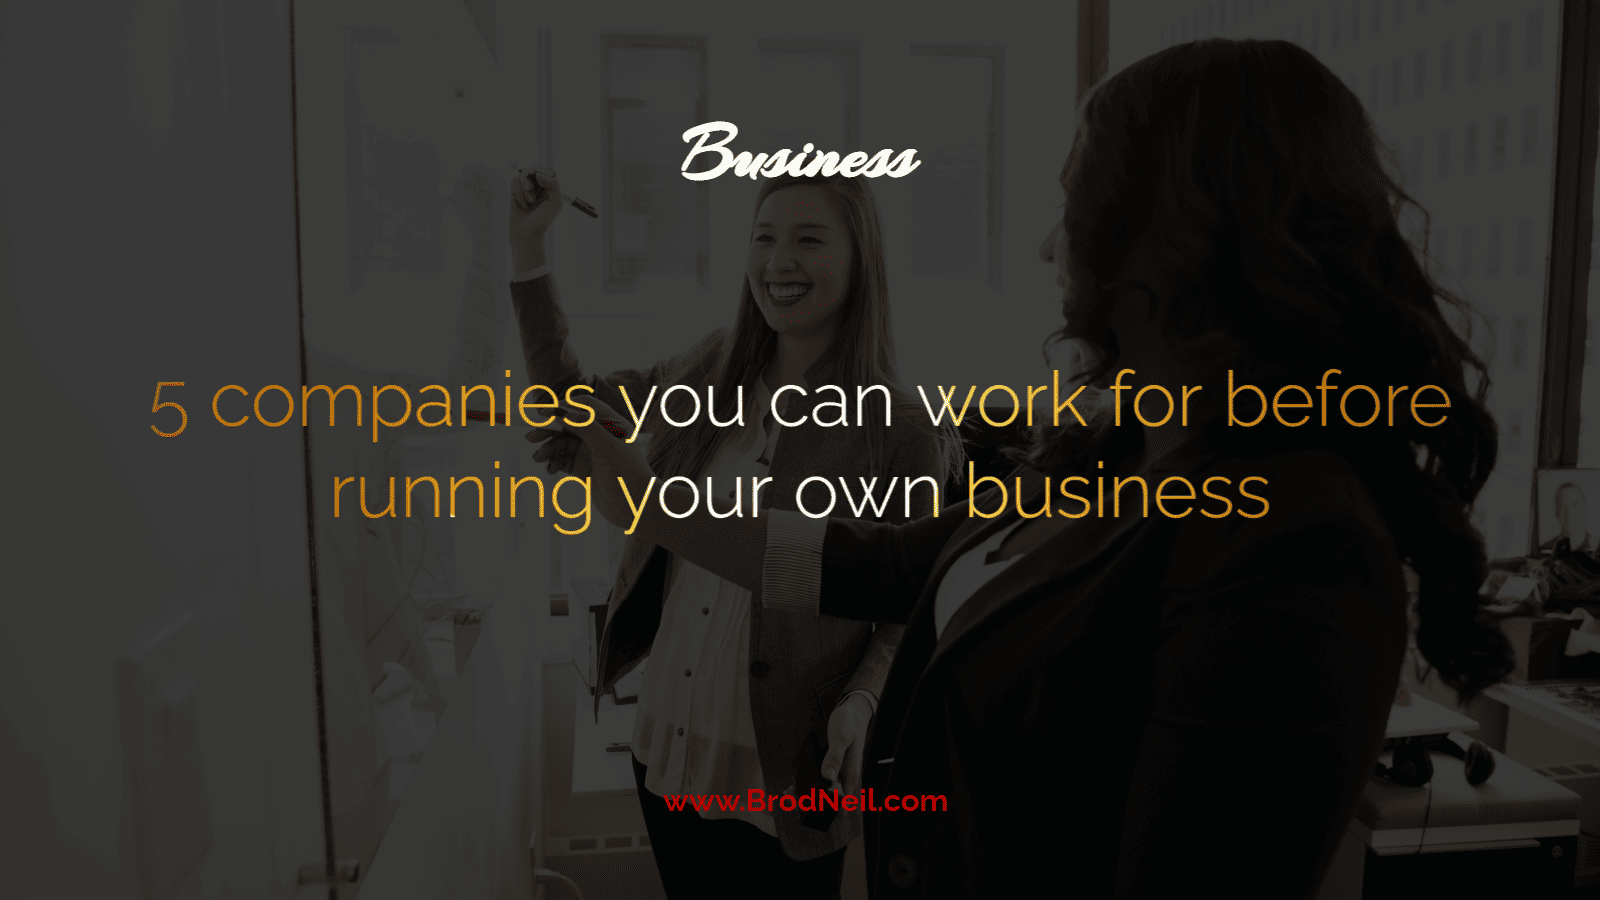 5 companies you can work for before running your own business - work experience